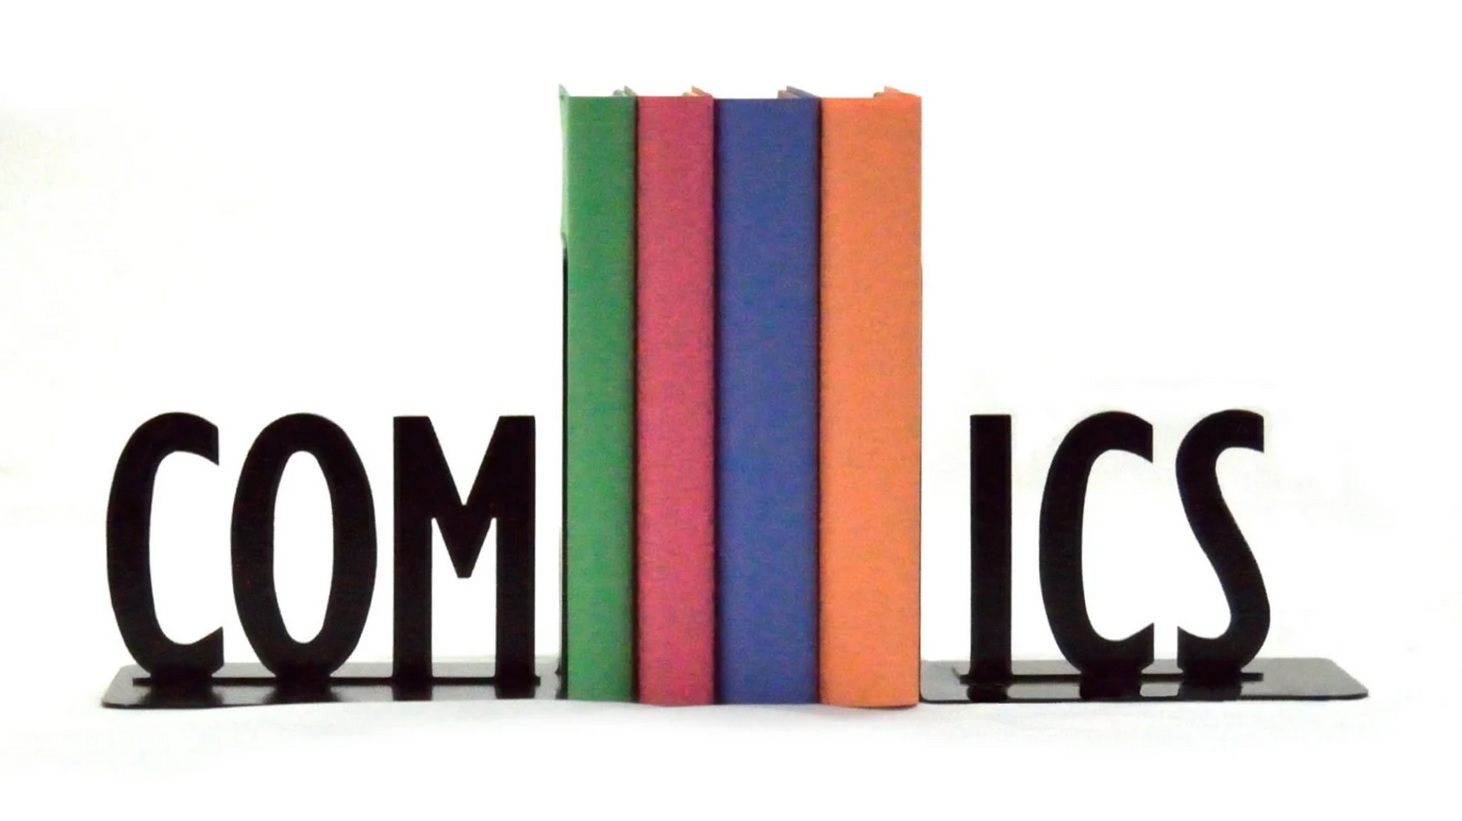 A pair of metal bookends; one end has the letters C-O-M and the other has I-C-S